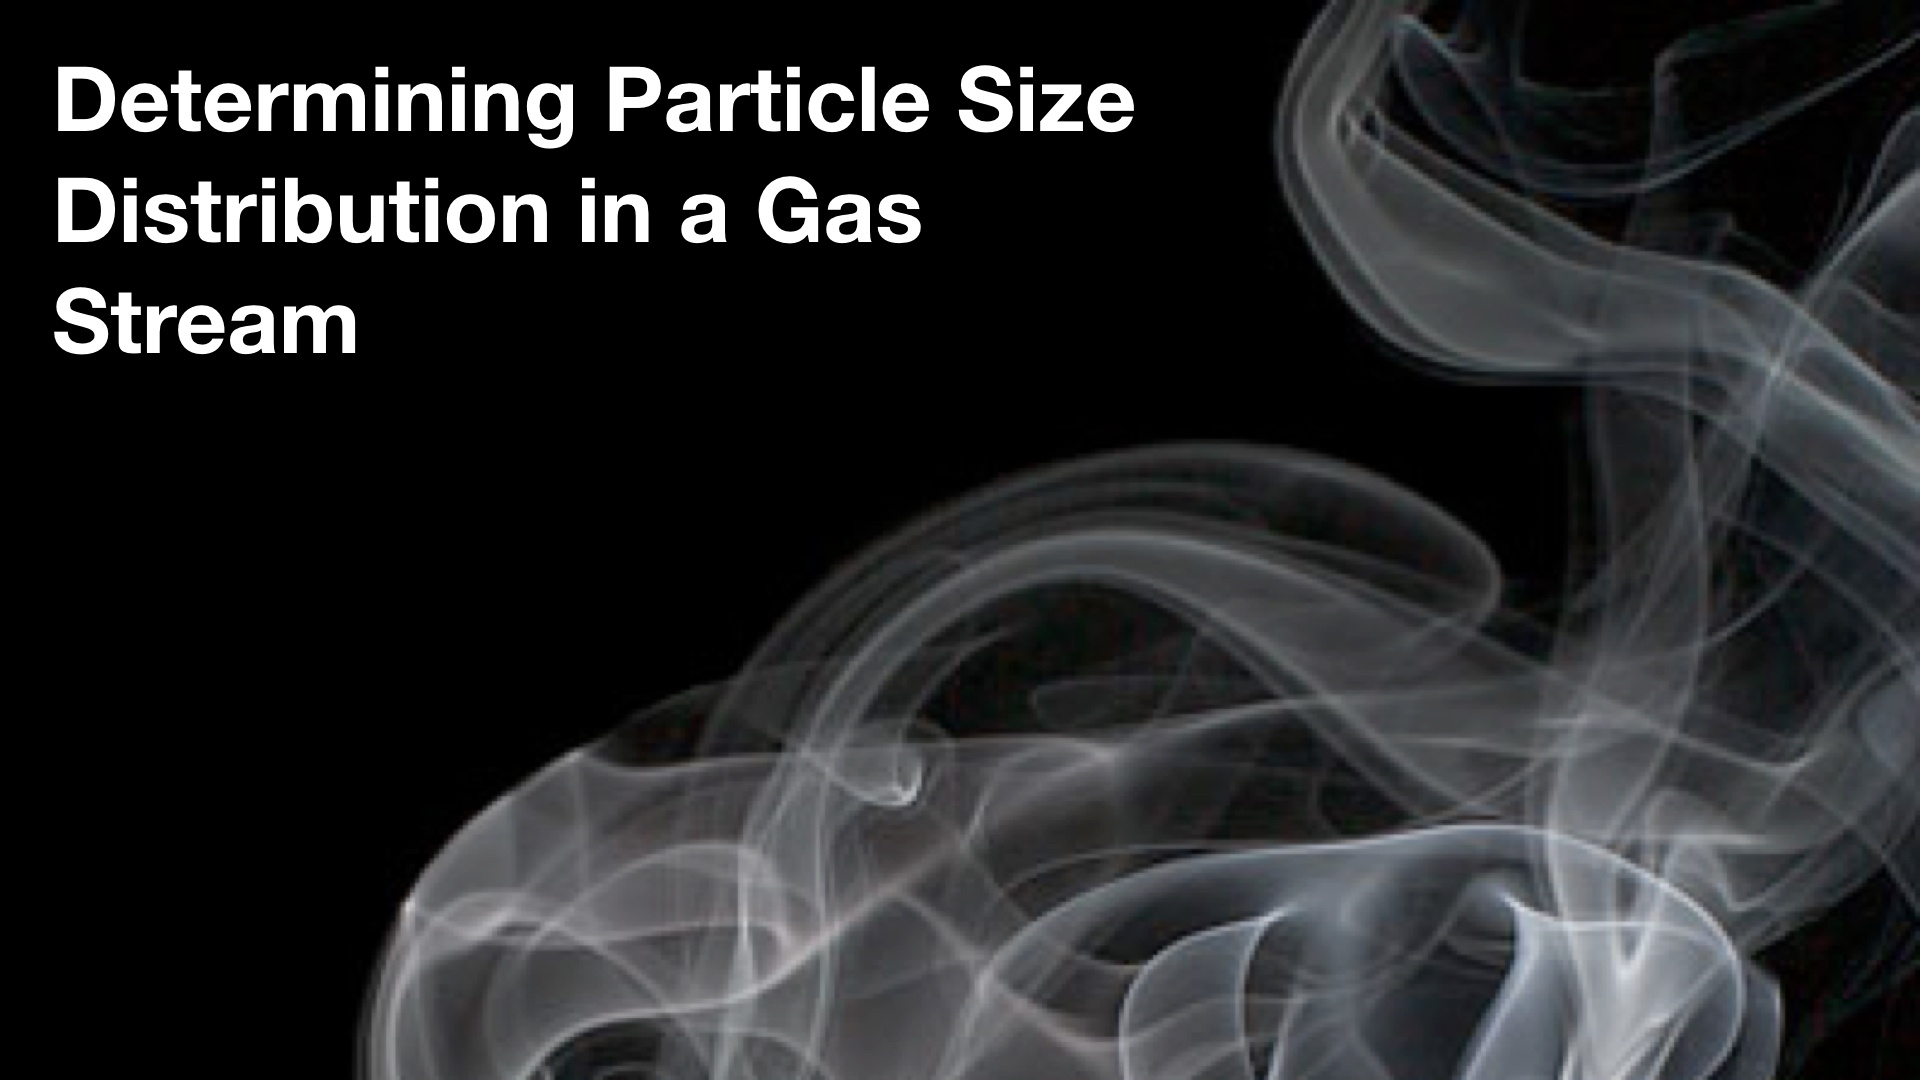 Determining Insitu Particle Size Distribution in a Gas Stream